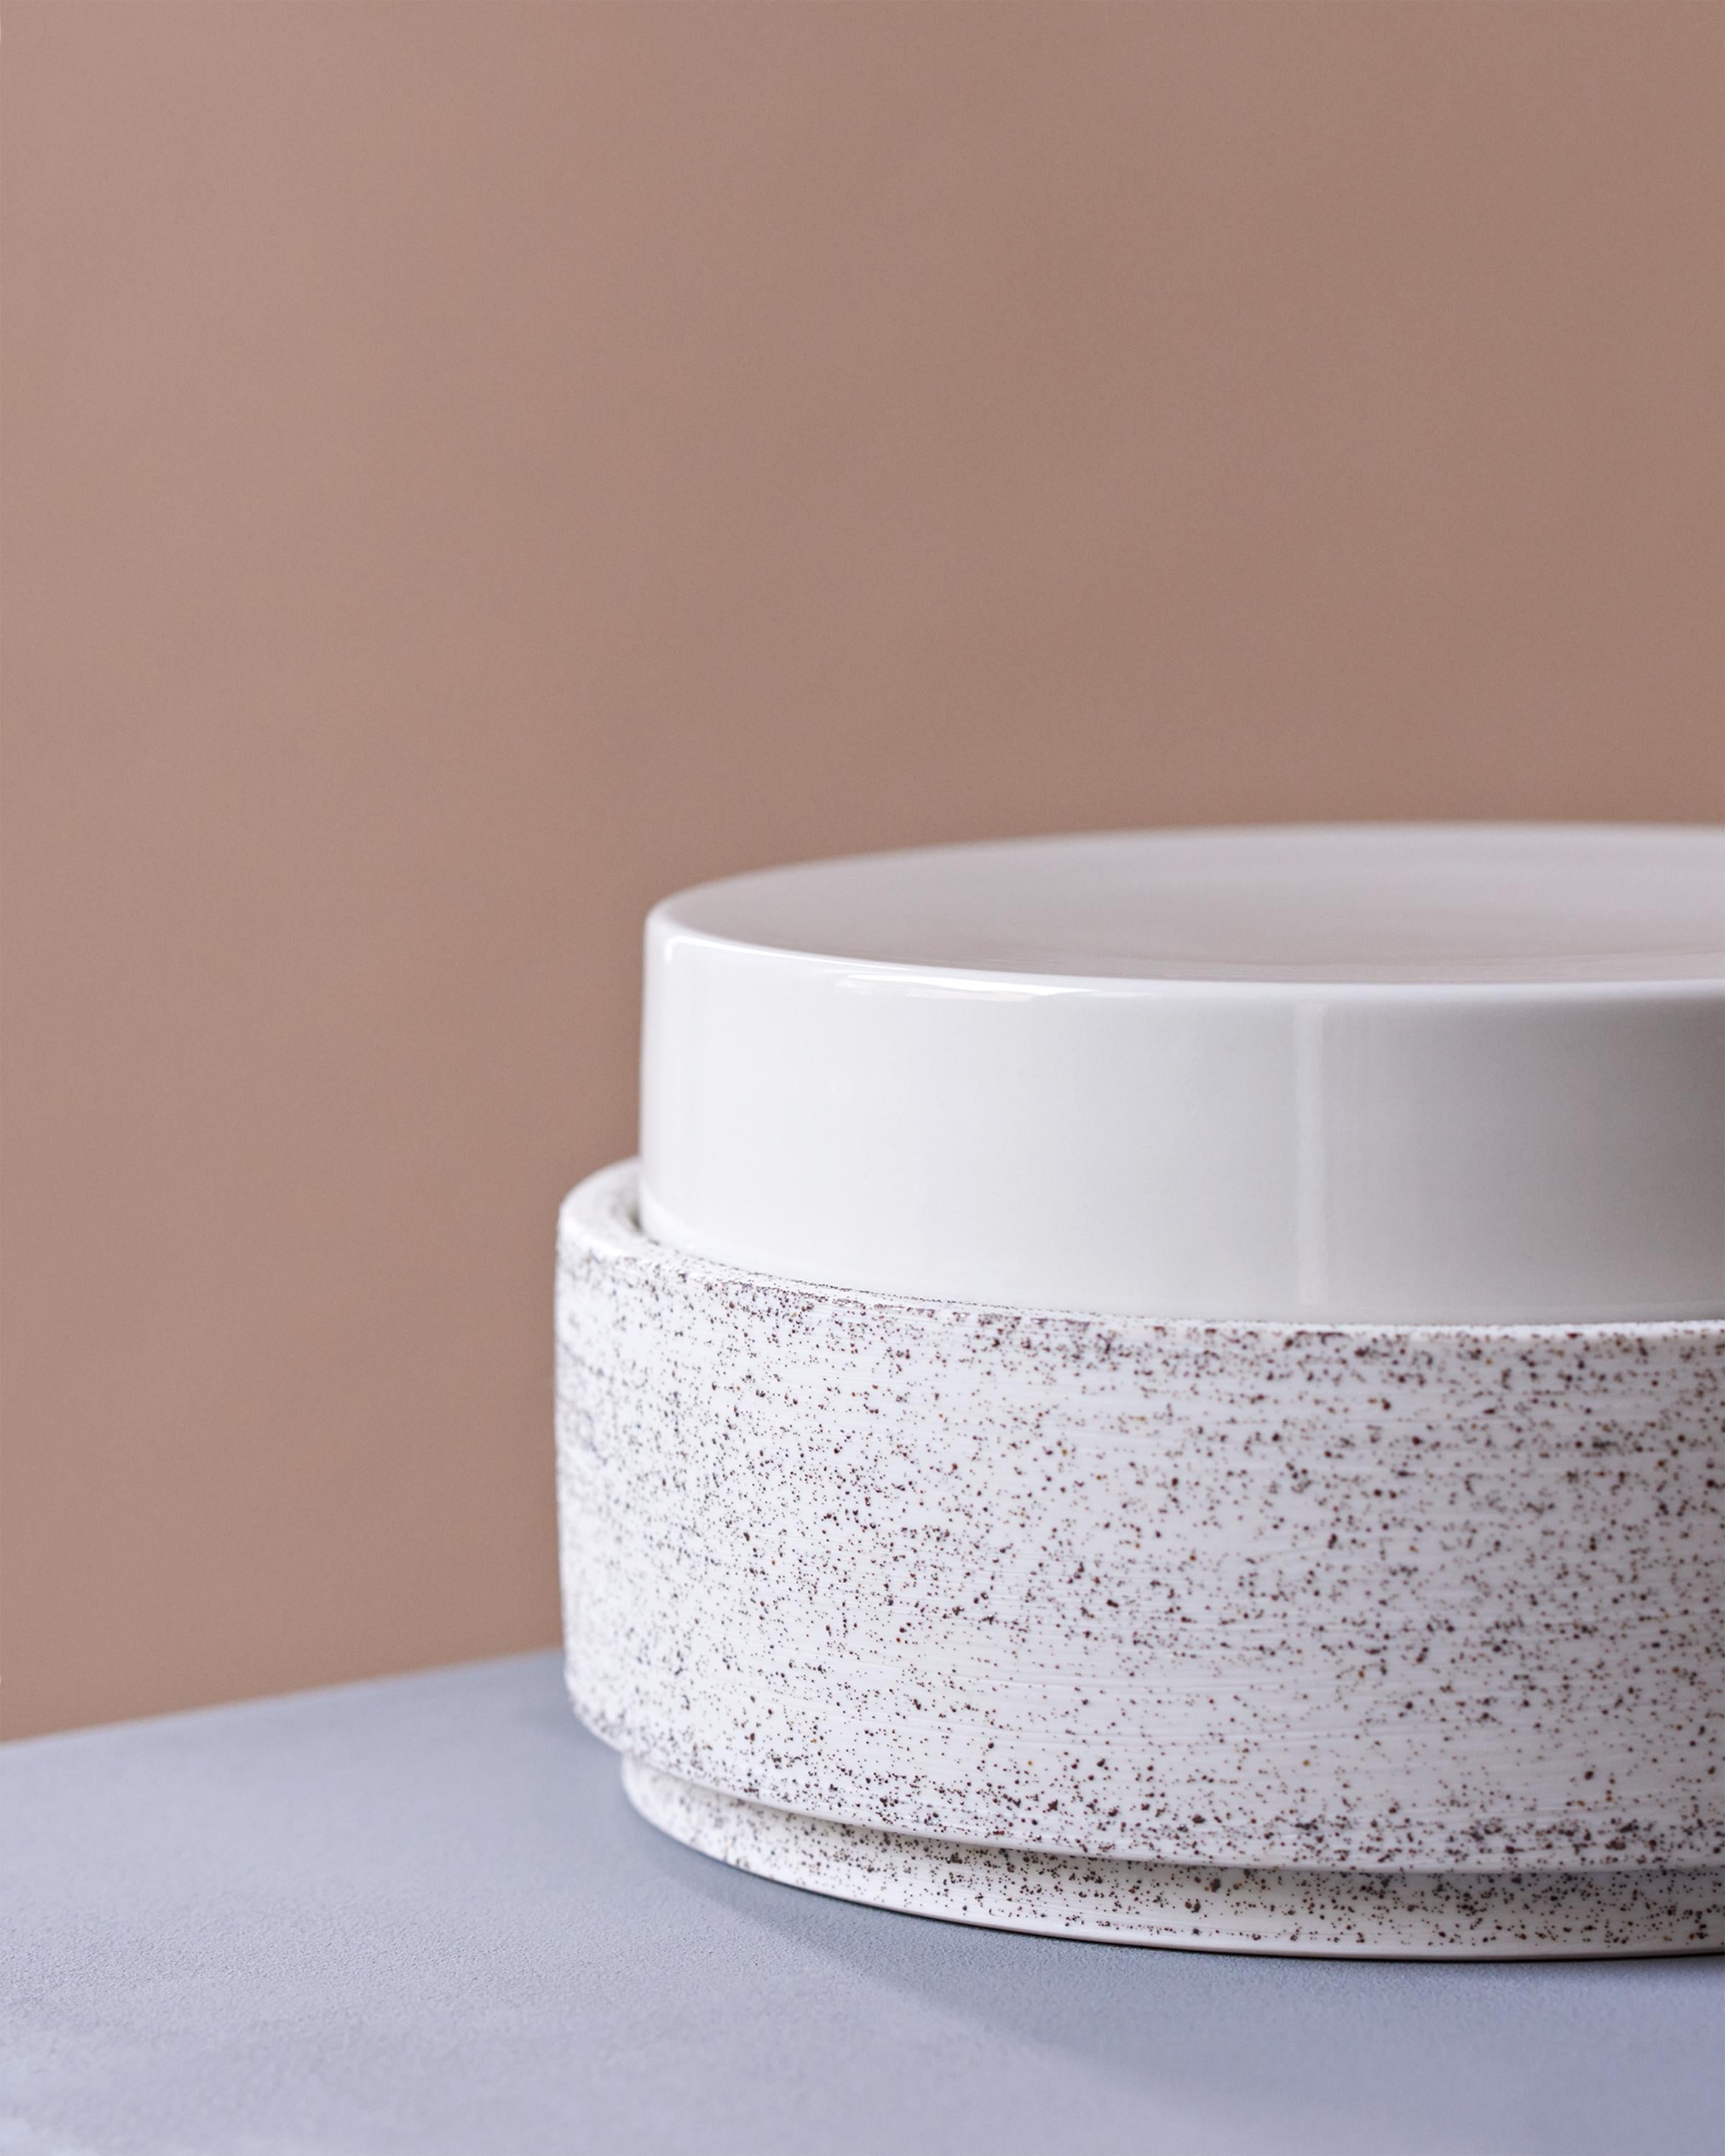 This hand-thrown porcelain bowl is a contemporary and functional stand out piece. The bowl is made of volcanic sand with a glossy white porcelain lid. The bowl has a size of diameter 20.7cm, height 10 cm

The first Atlas Crafts collection is